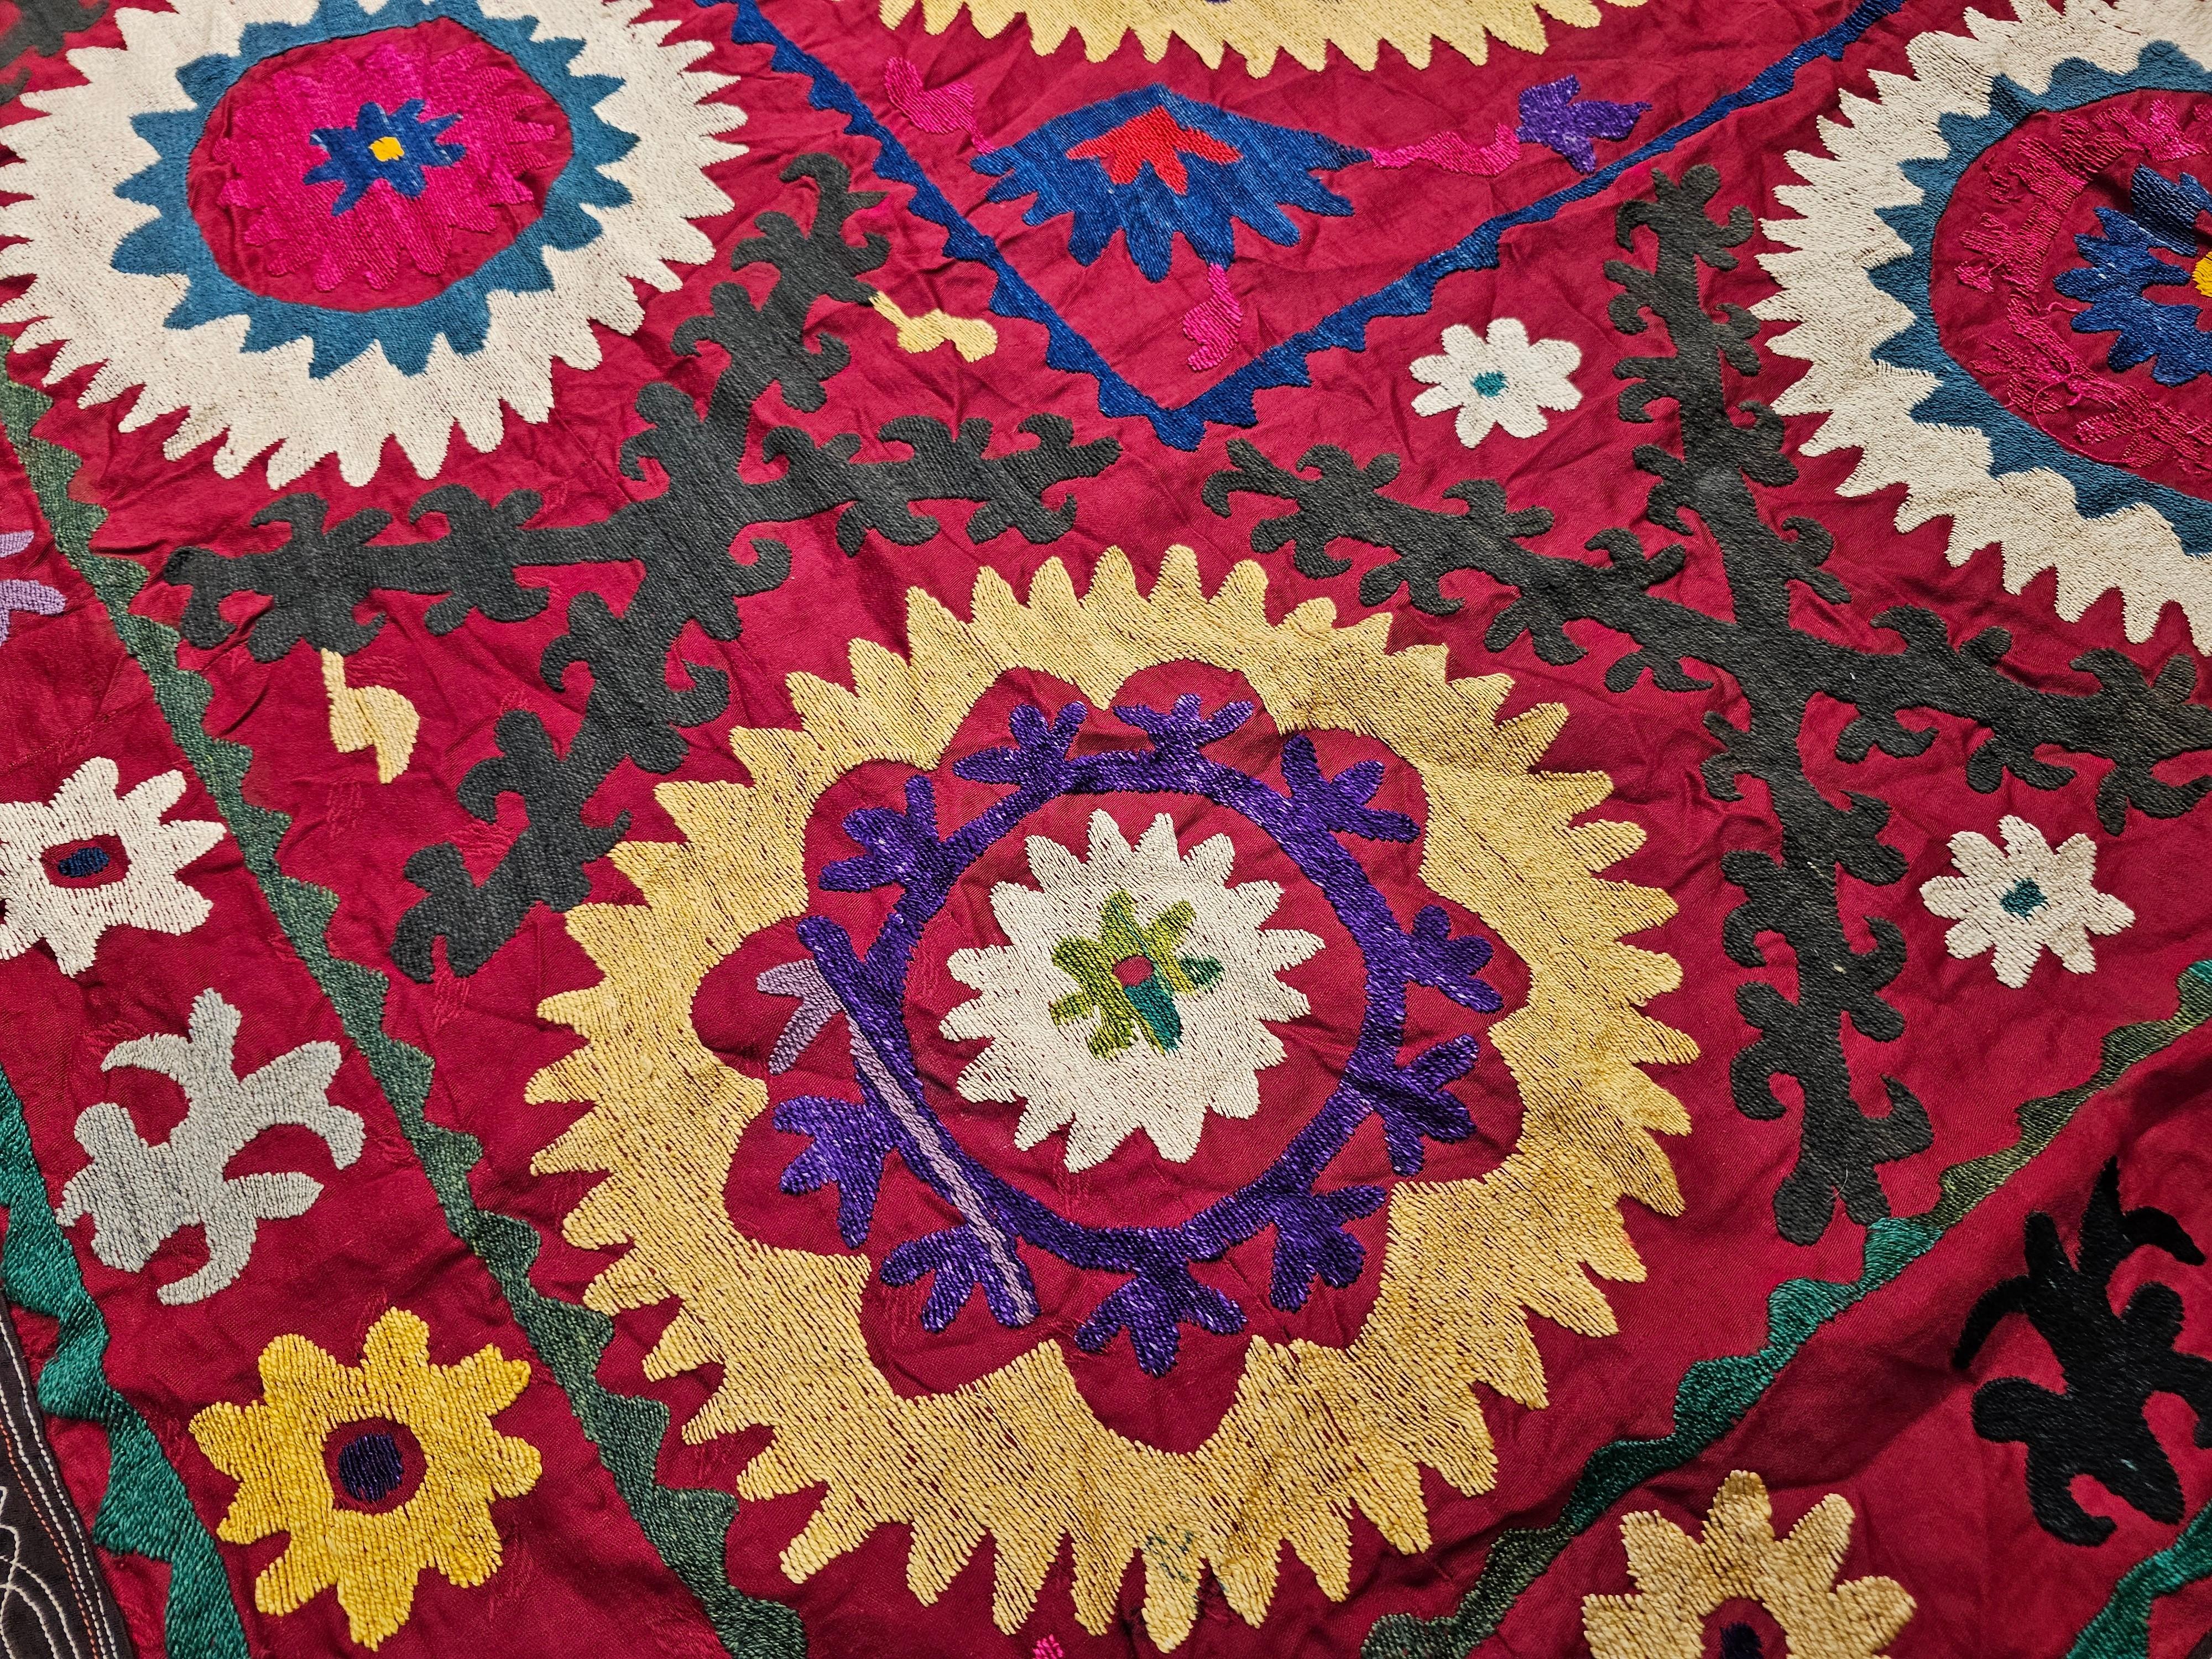 Vintage Uzbek Suzani Silk Embroidery in Crimson Red, Ivory, Blue, Yellow, Black For Sale 4